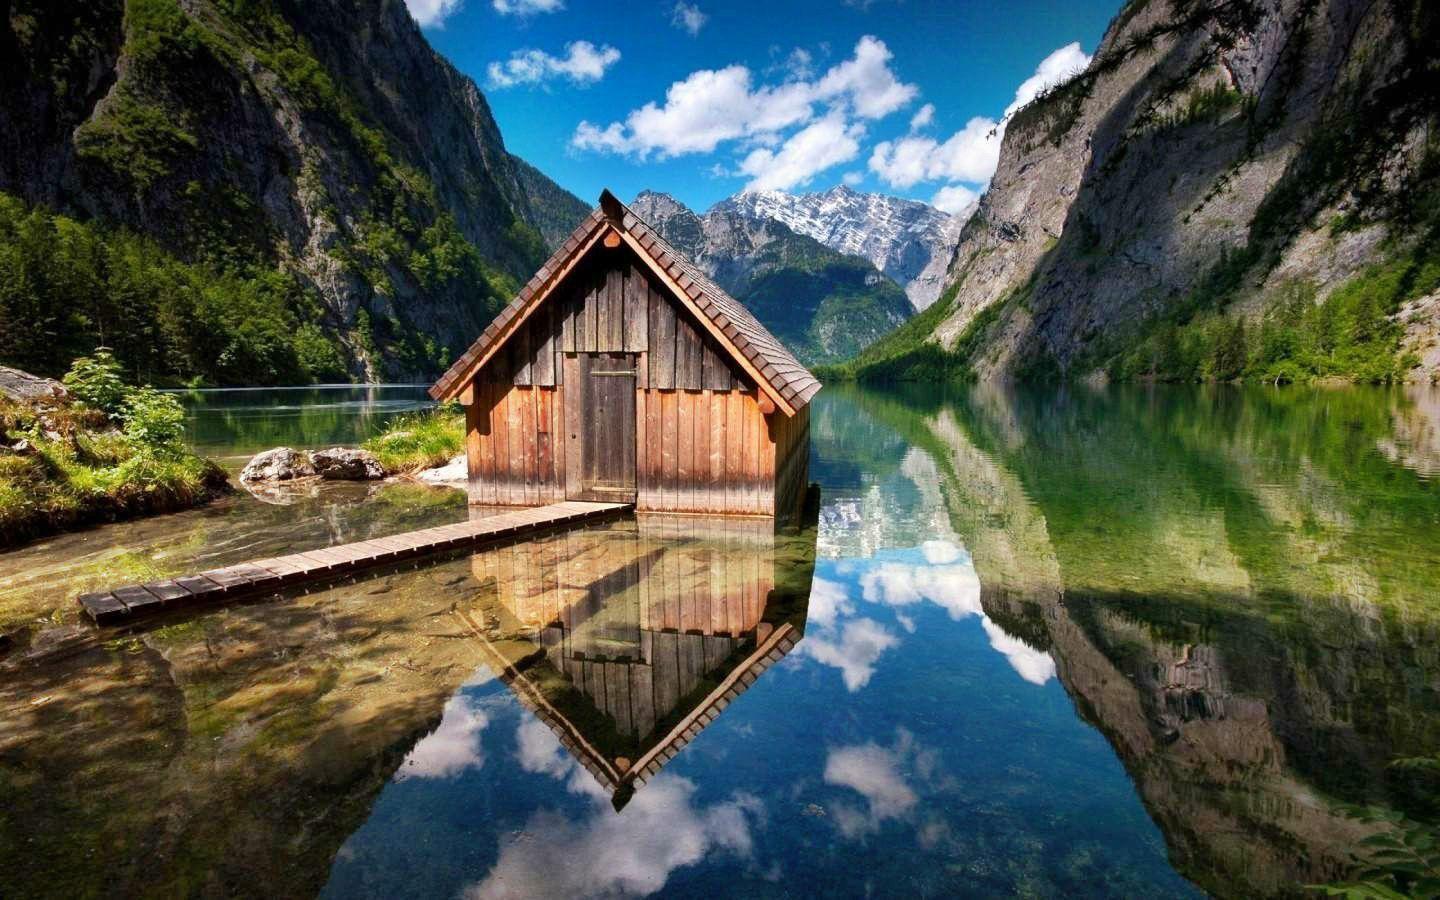 Mountain Shack Wallpaper. Photo Galleries and Wallpaper